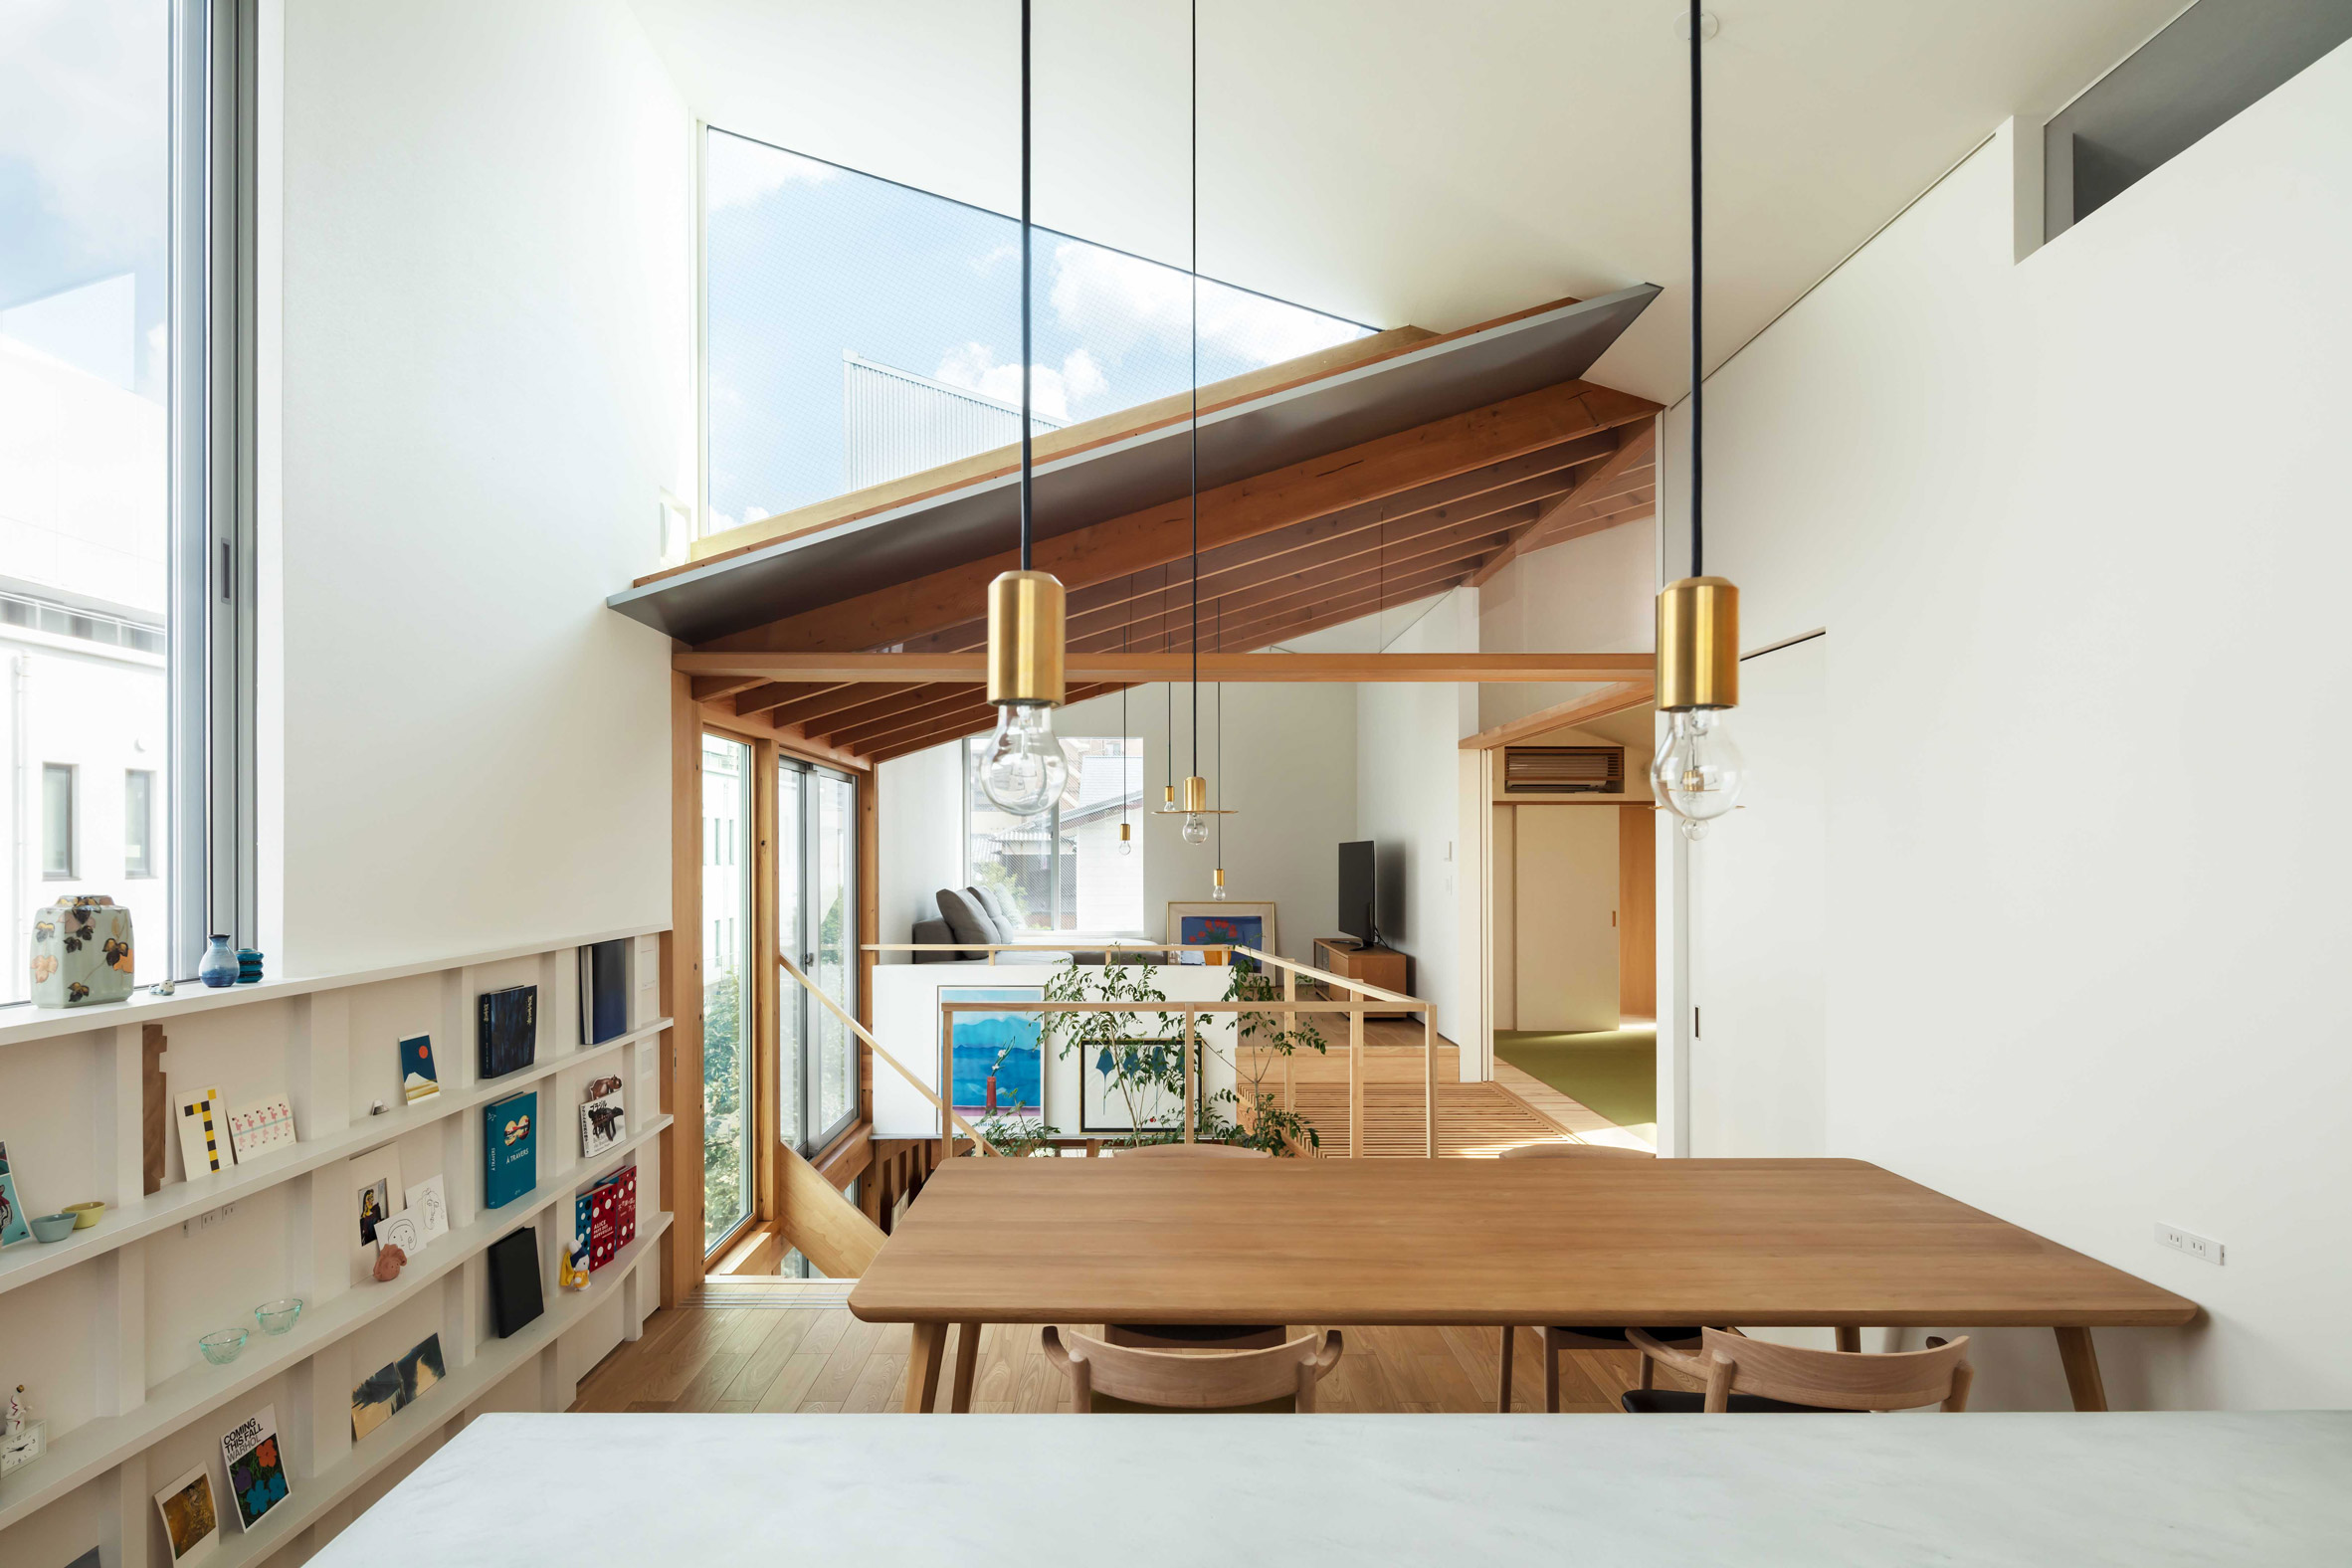 The dining room of a Japanese house